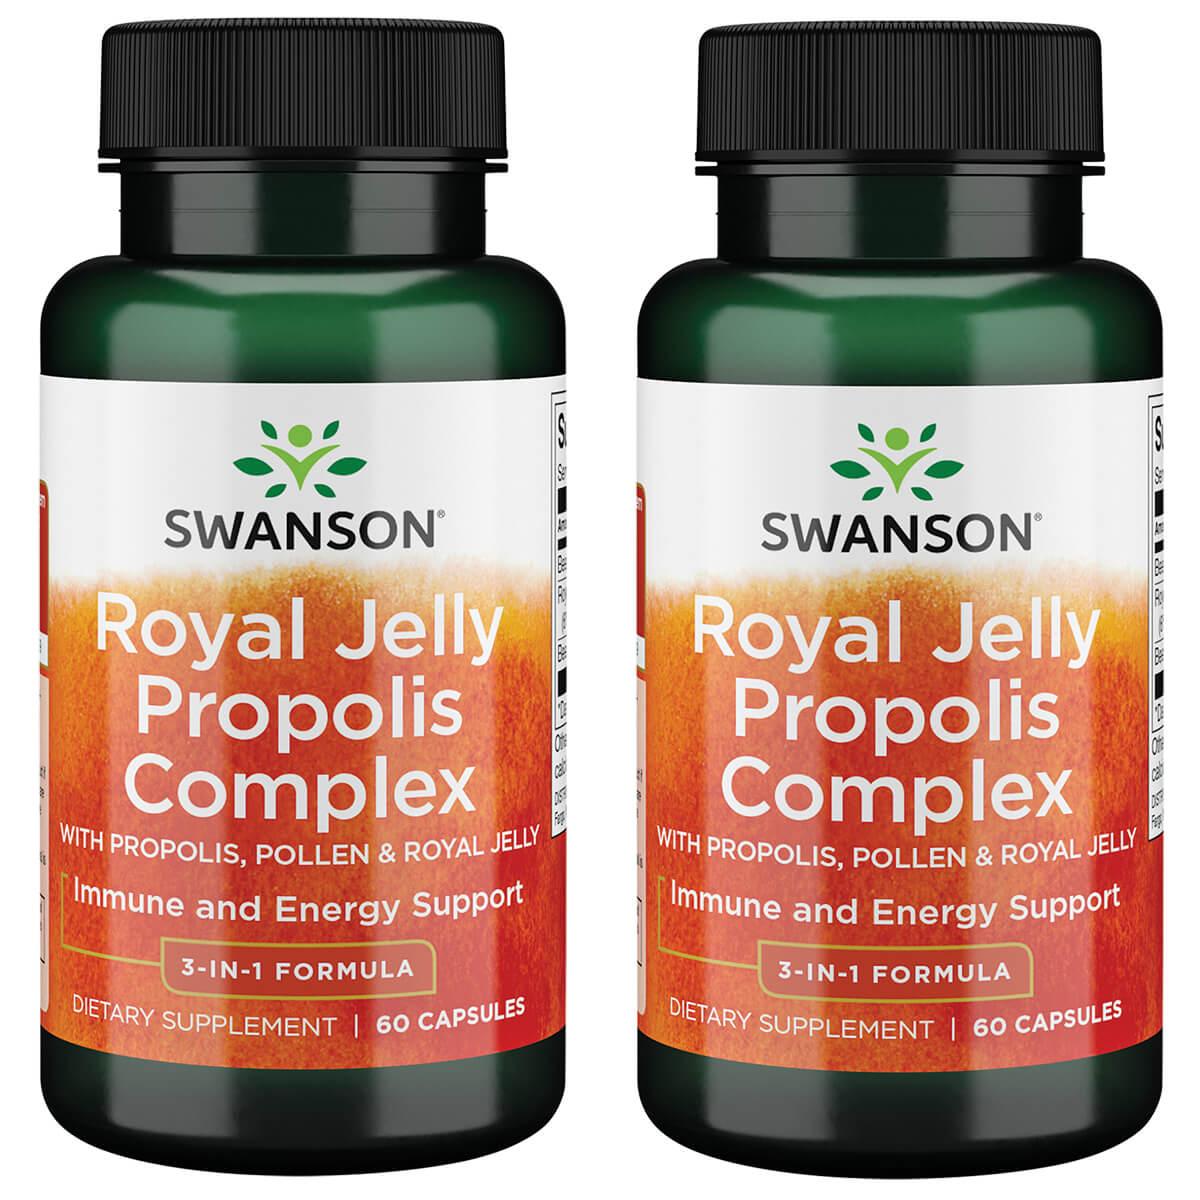 Swanson Ultra Royal Jelly Propolis Complex 2 Pack Supplement Vitamin 60 Caps